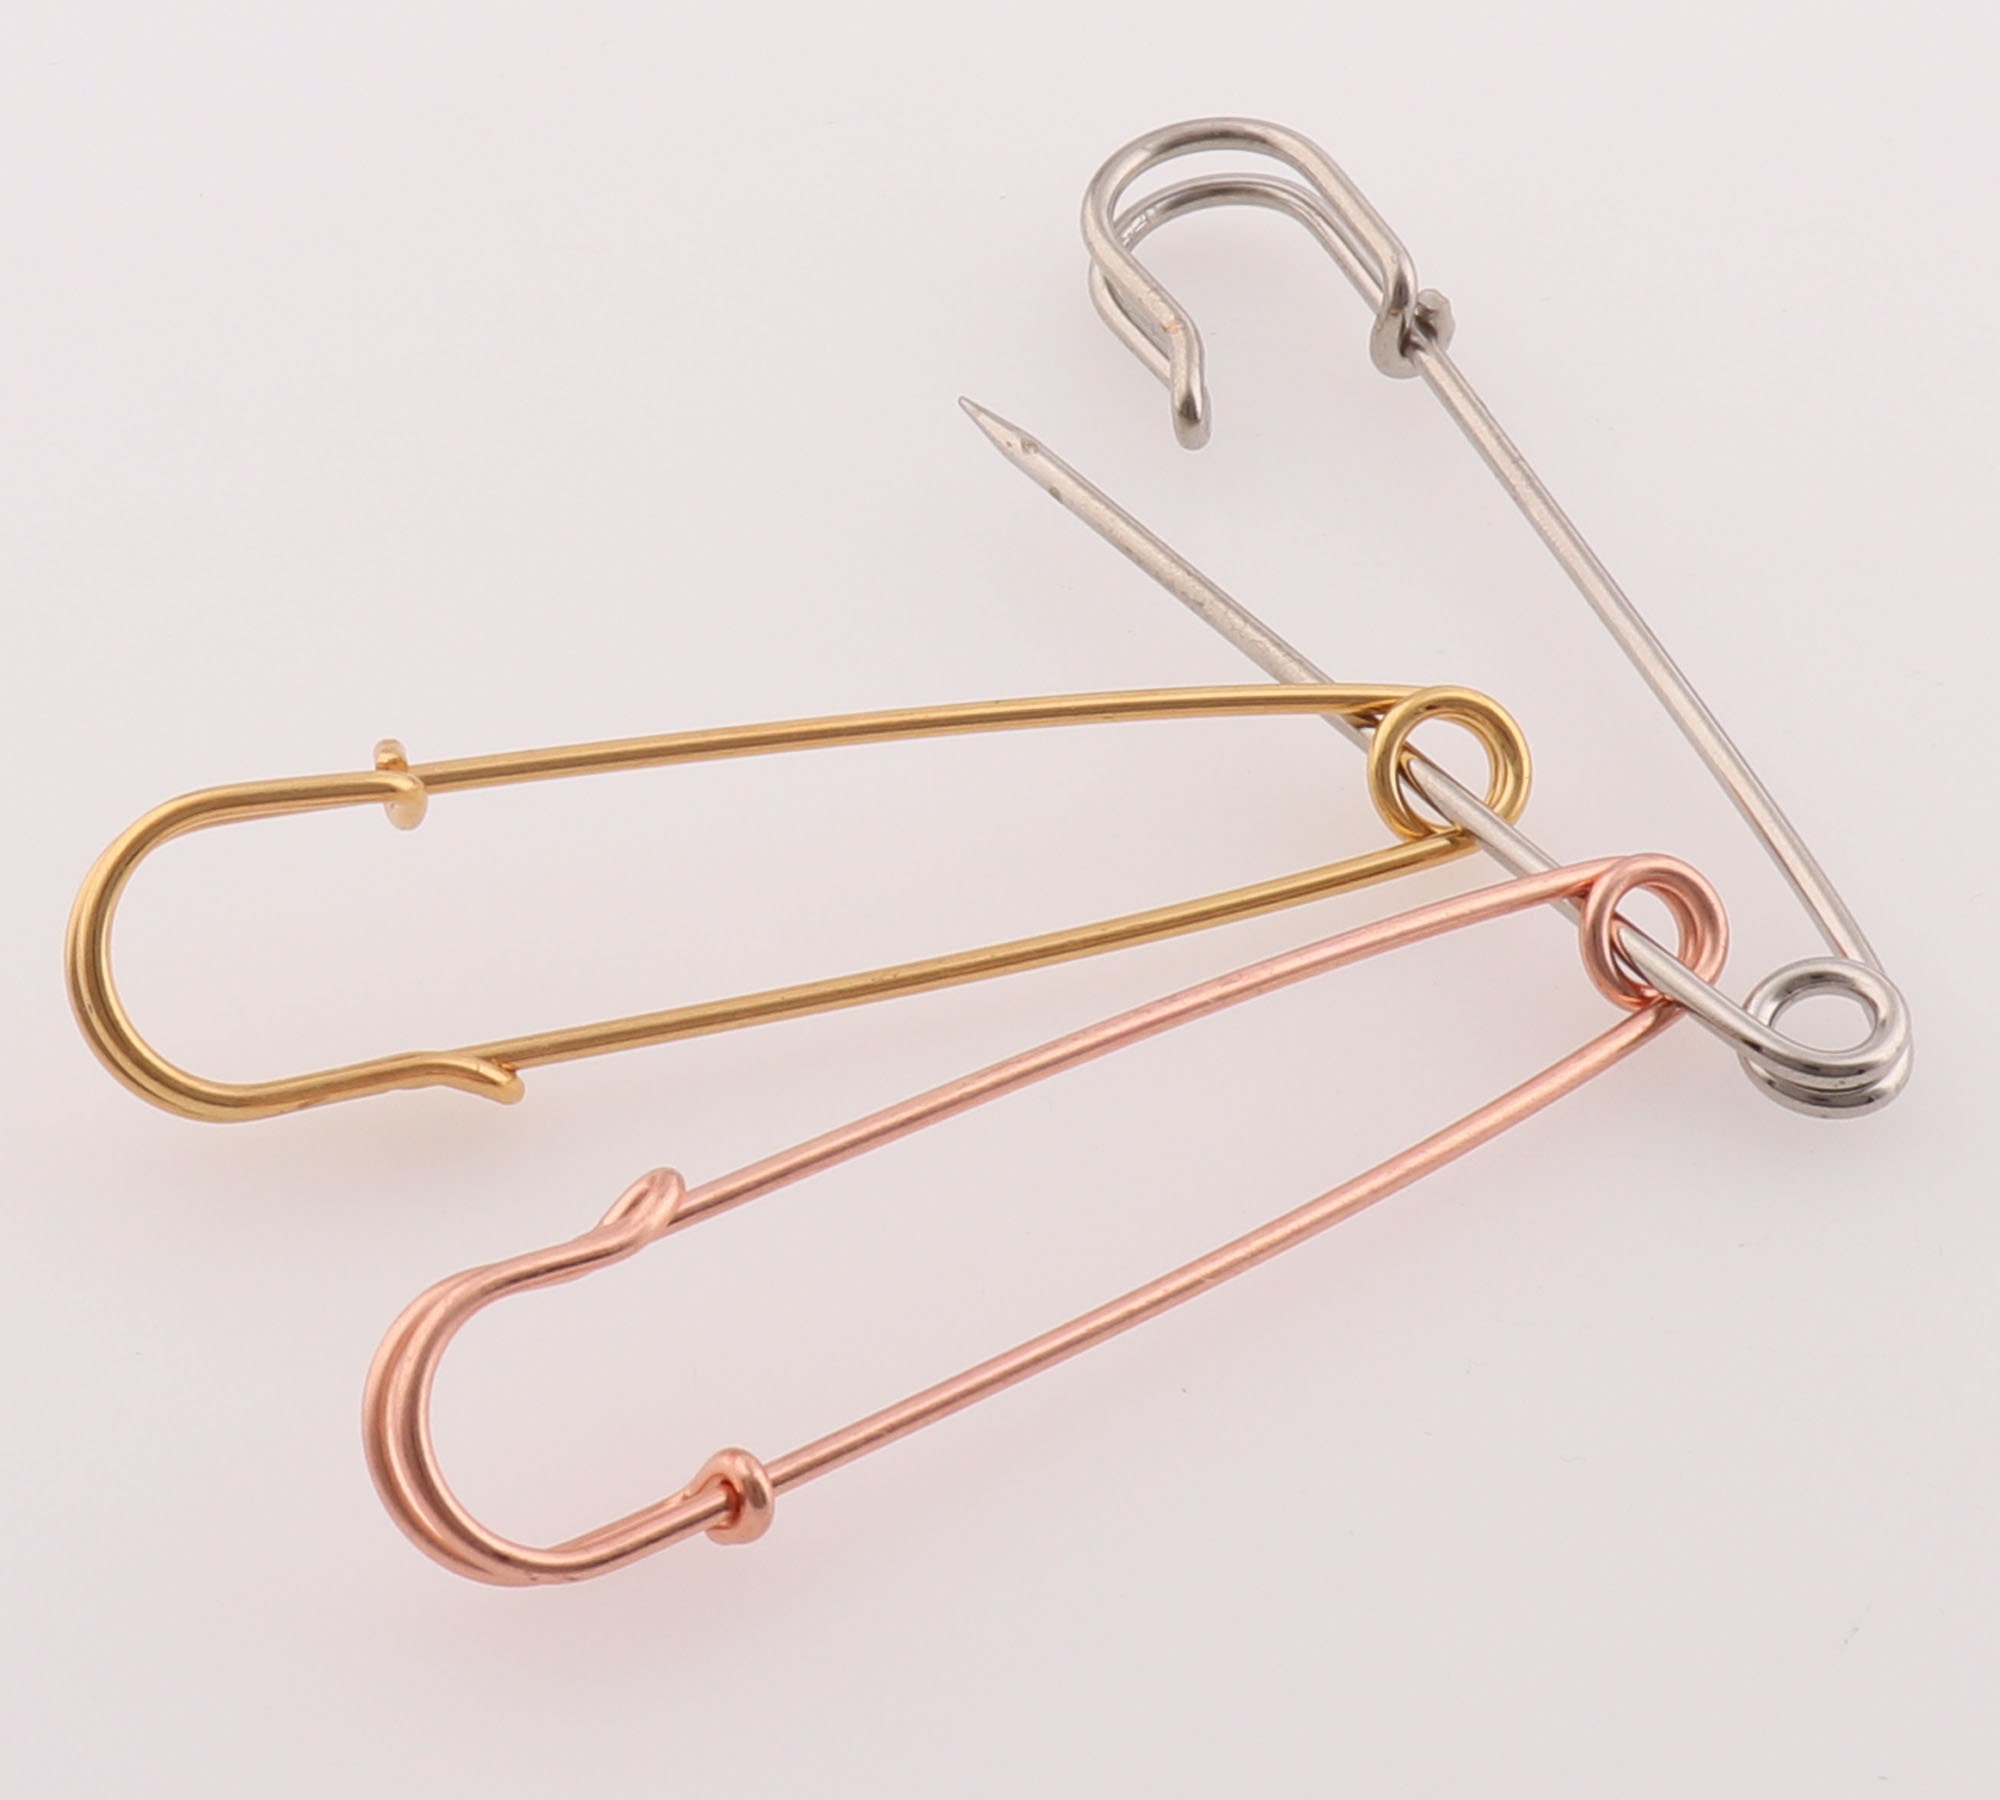 20 Pcs Rose Gold/silver Large Safety Pins,5628 Mm Brooch Pin Back